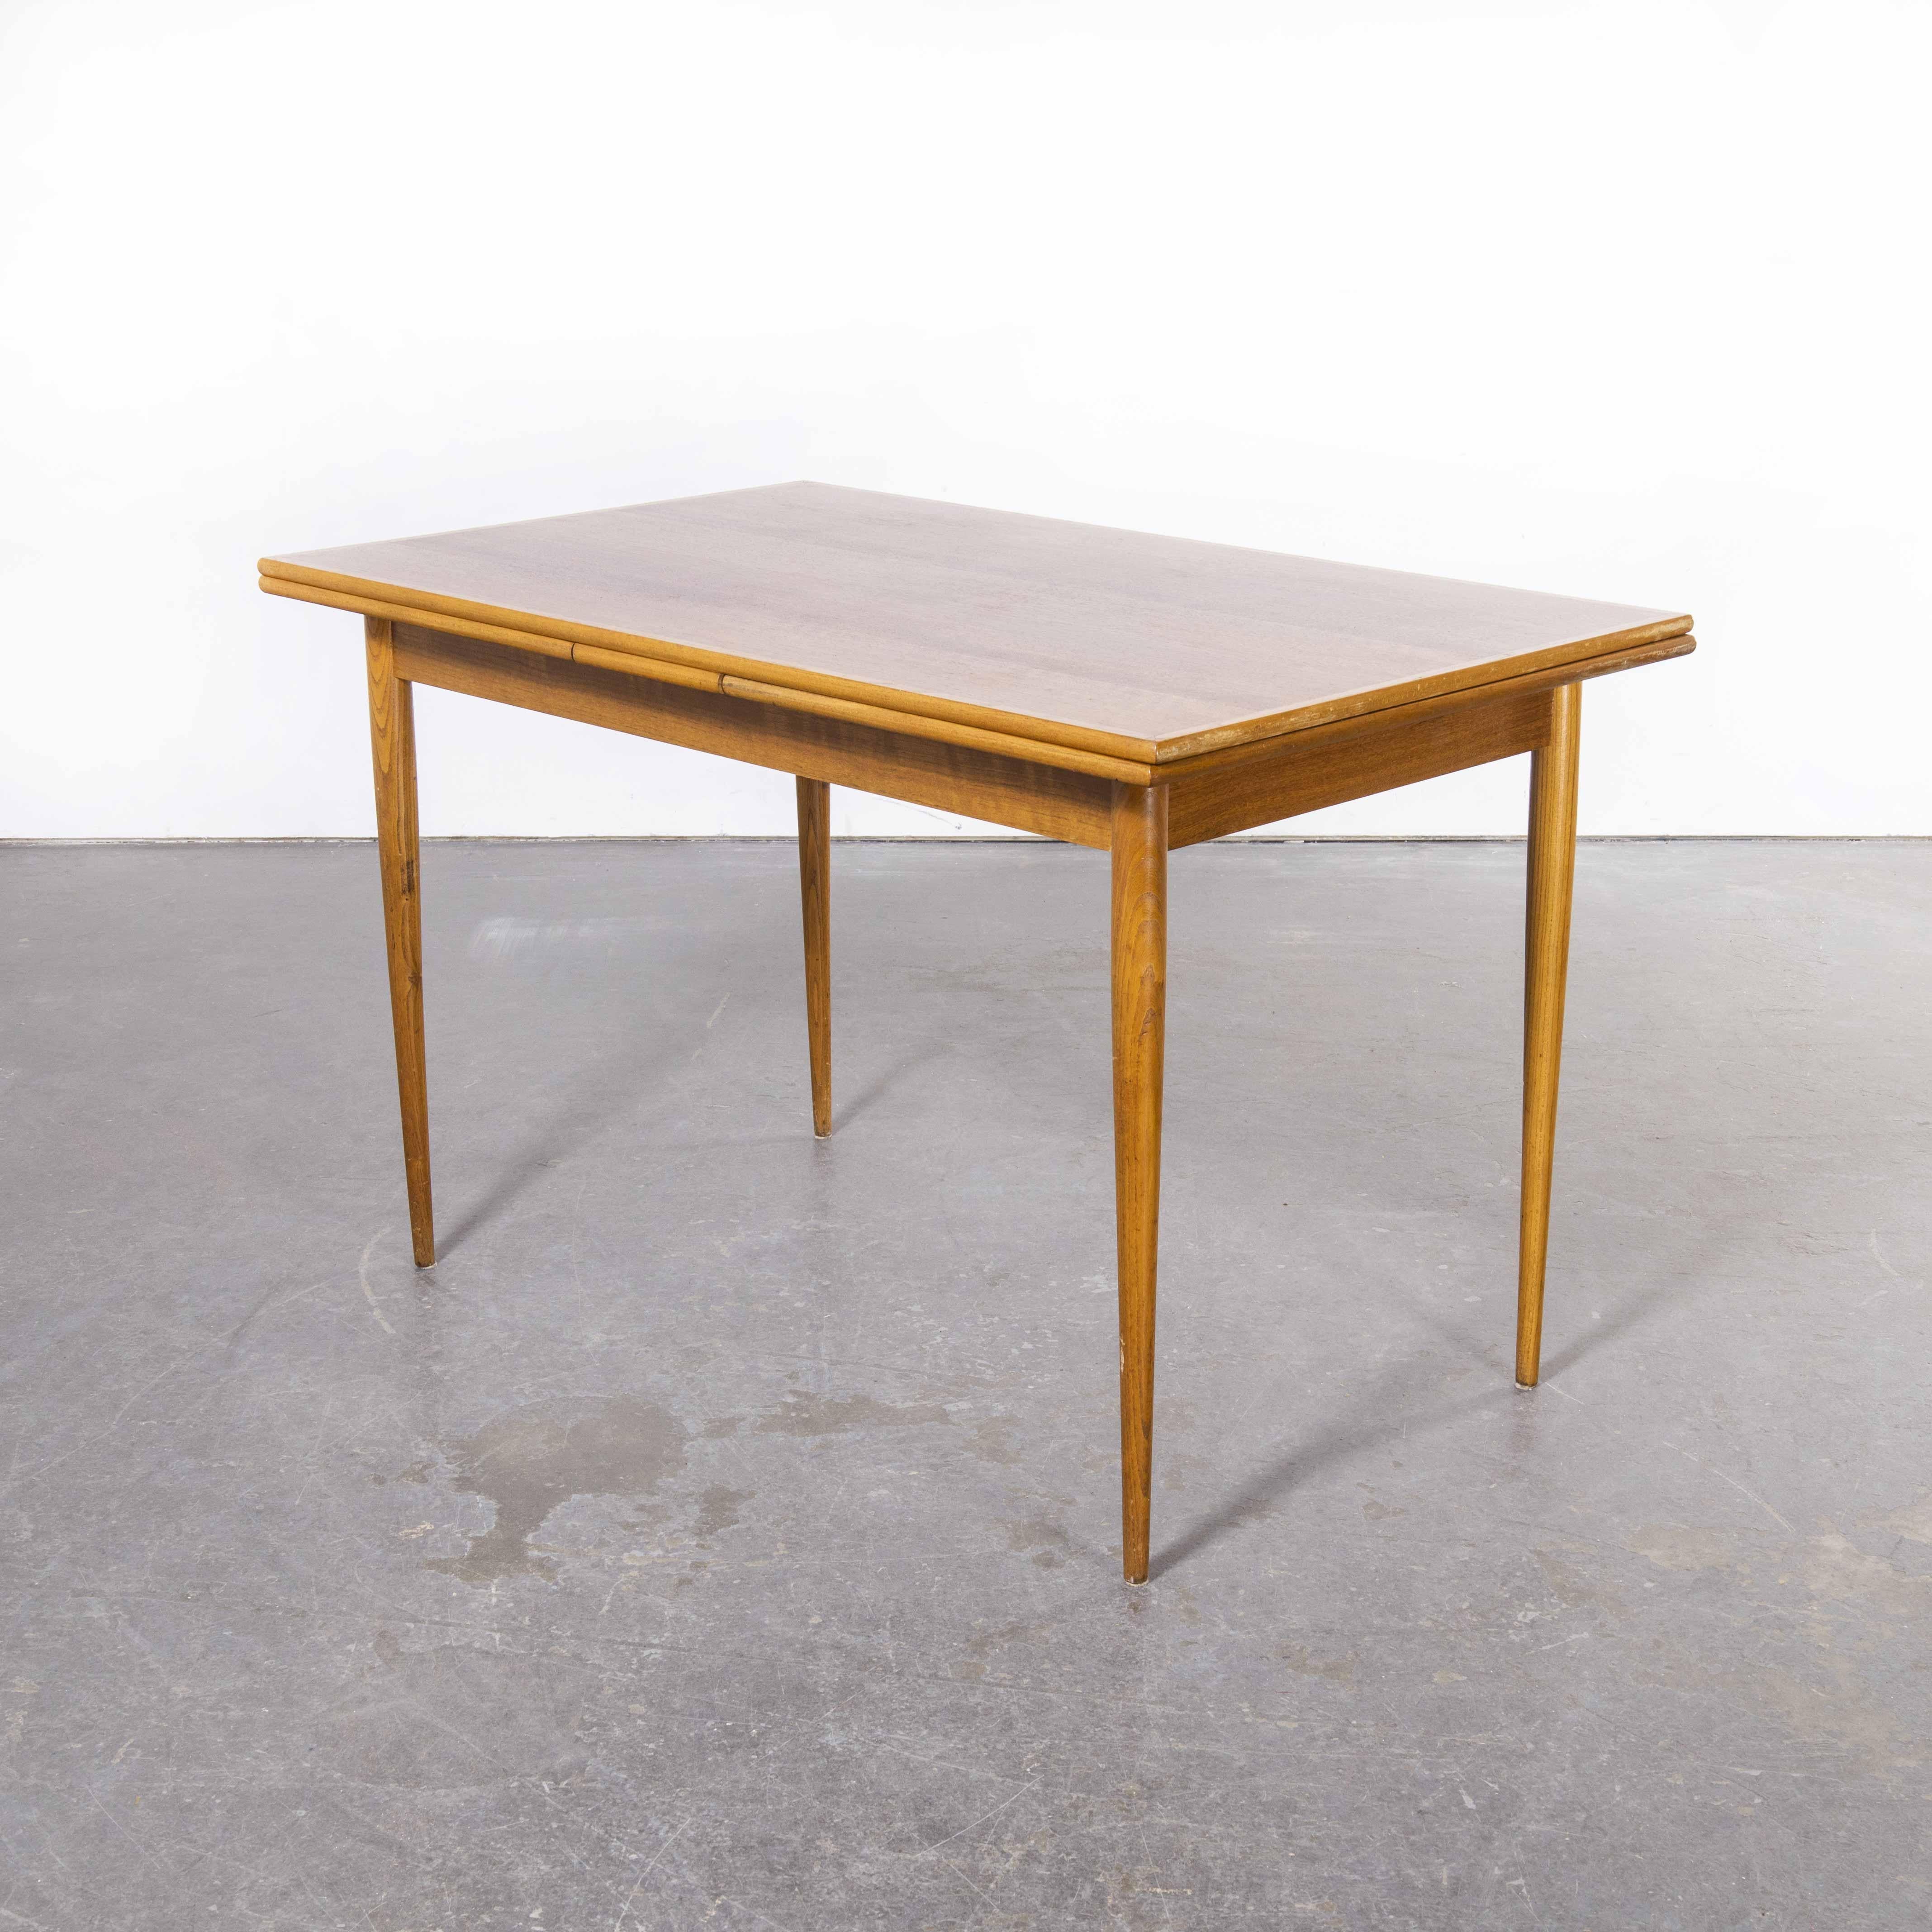 1950’s mid century rectangular extending dining table
1950’s mid century rectangular extending dining table. Superb practical piece of mid century furniture, a good size at 120cm length but easily extending to 220cm. Czech was a large producer of